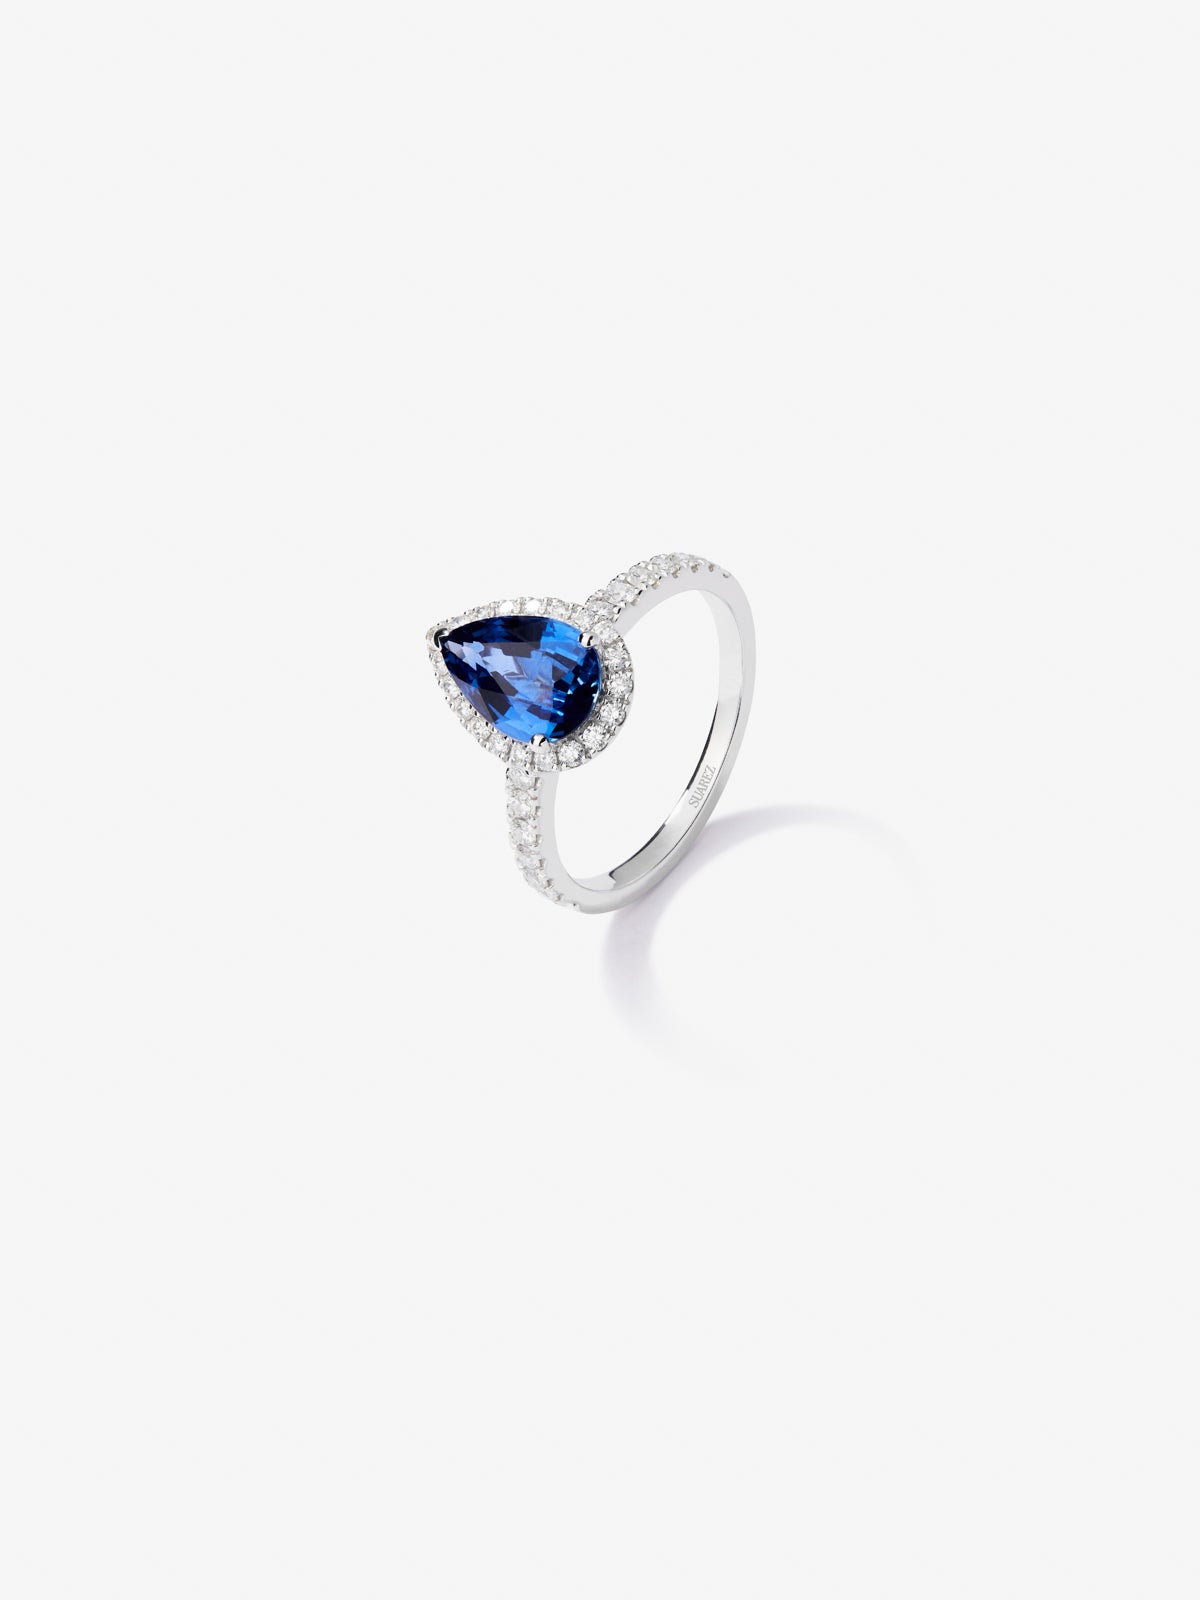 18K white gold ring with pear-cut blue sapphire of 2.35 cts and border and arm of 34 brilliant-cut diamonds with a total of 0.42 cts